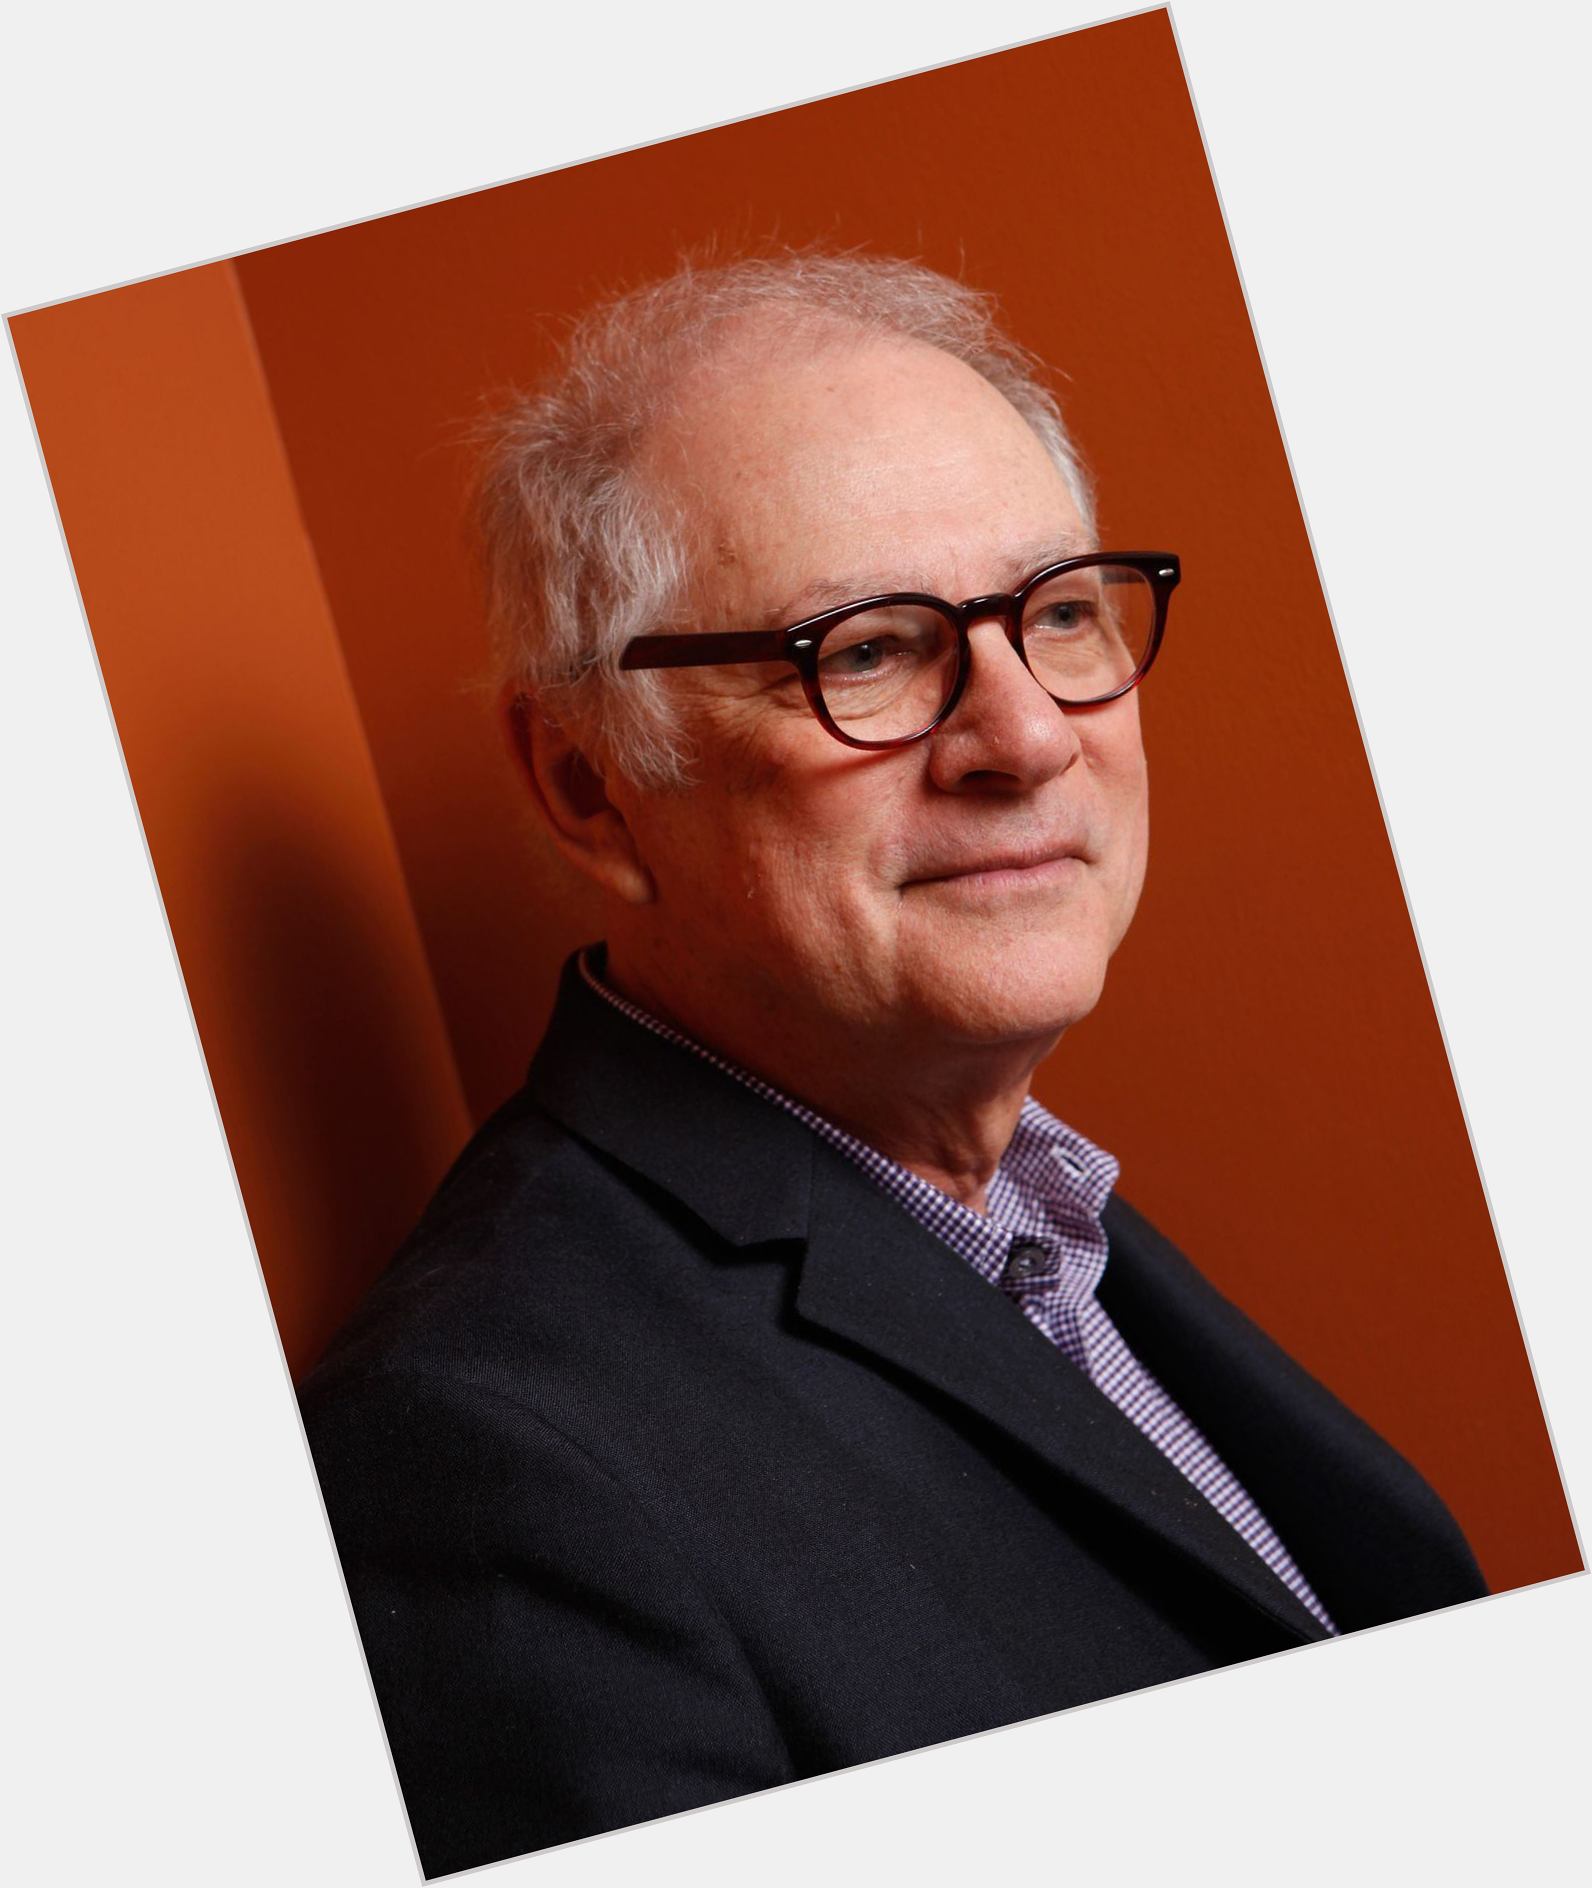 Http://fanpagepress.net/m/B/Barry Levinson New Pic 1